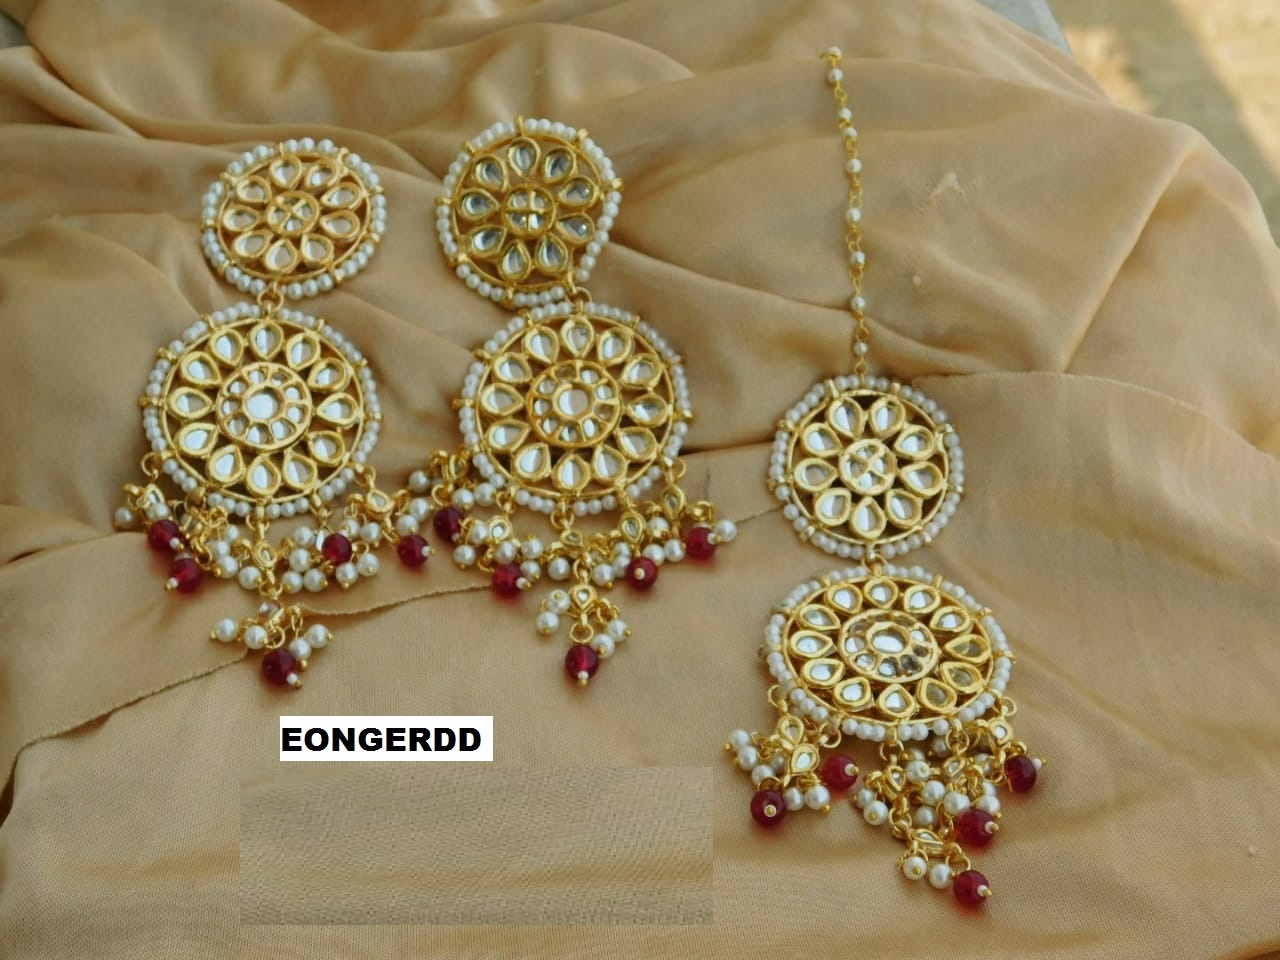 Details about   Bollywood Fashion Earrings Ethnic Indian Bridal Jewelry Cz Manng Tikka Set ej13 